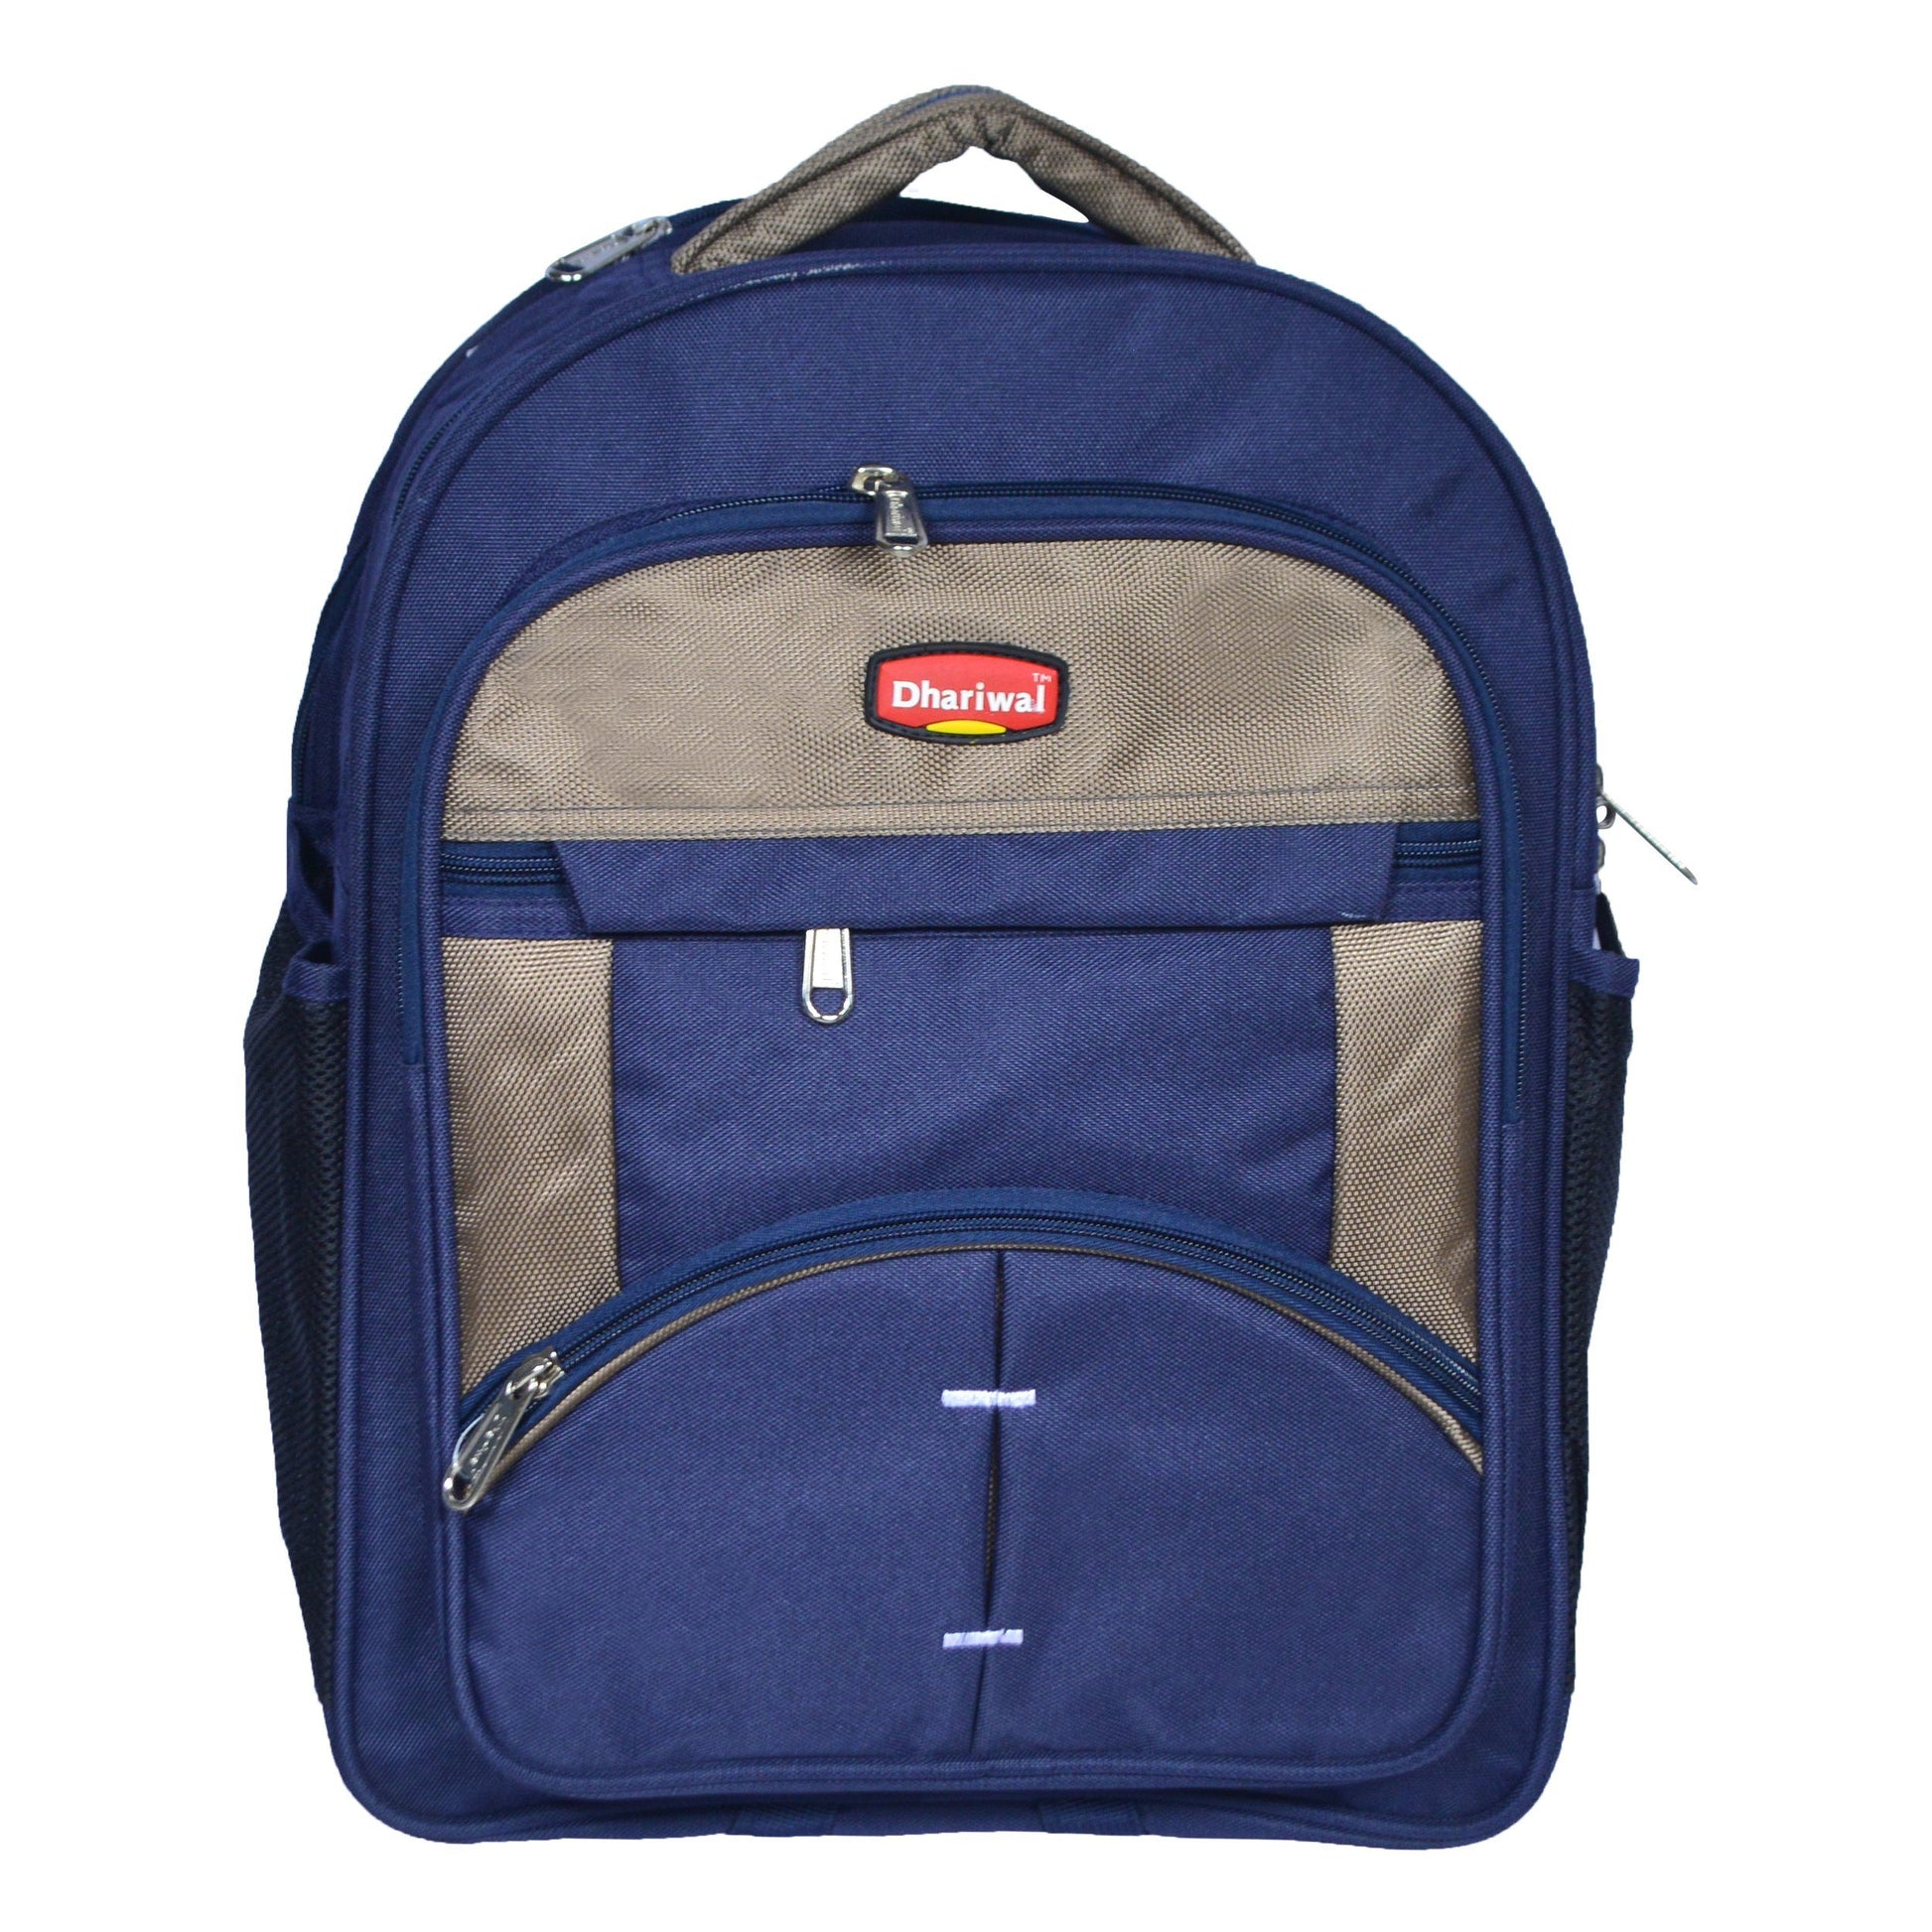 Dhariwal 26L Water Resistant Dual Compartment Matty School Bag School Bag SCB-305 Class 1 to 4 School Bags Dhariwal Blue 